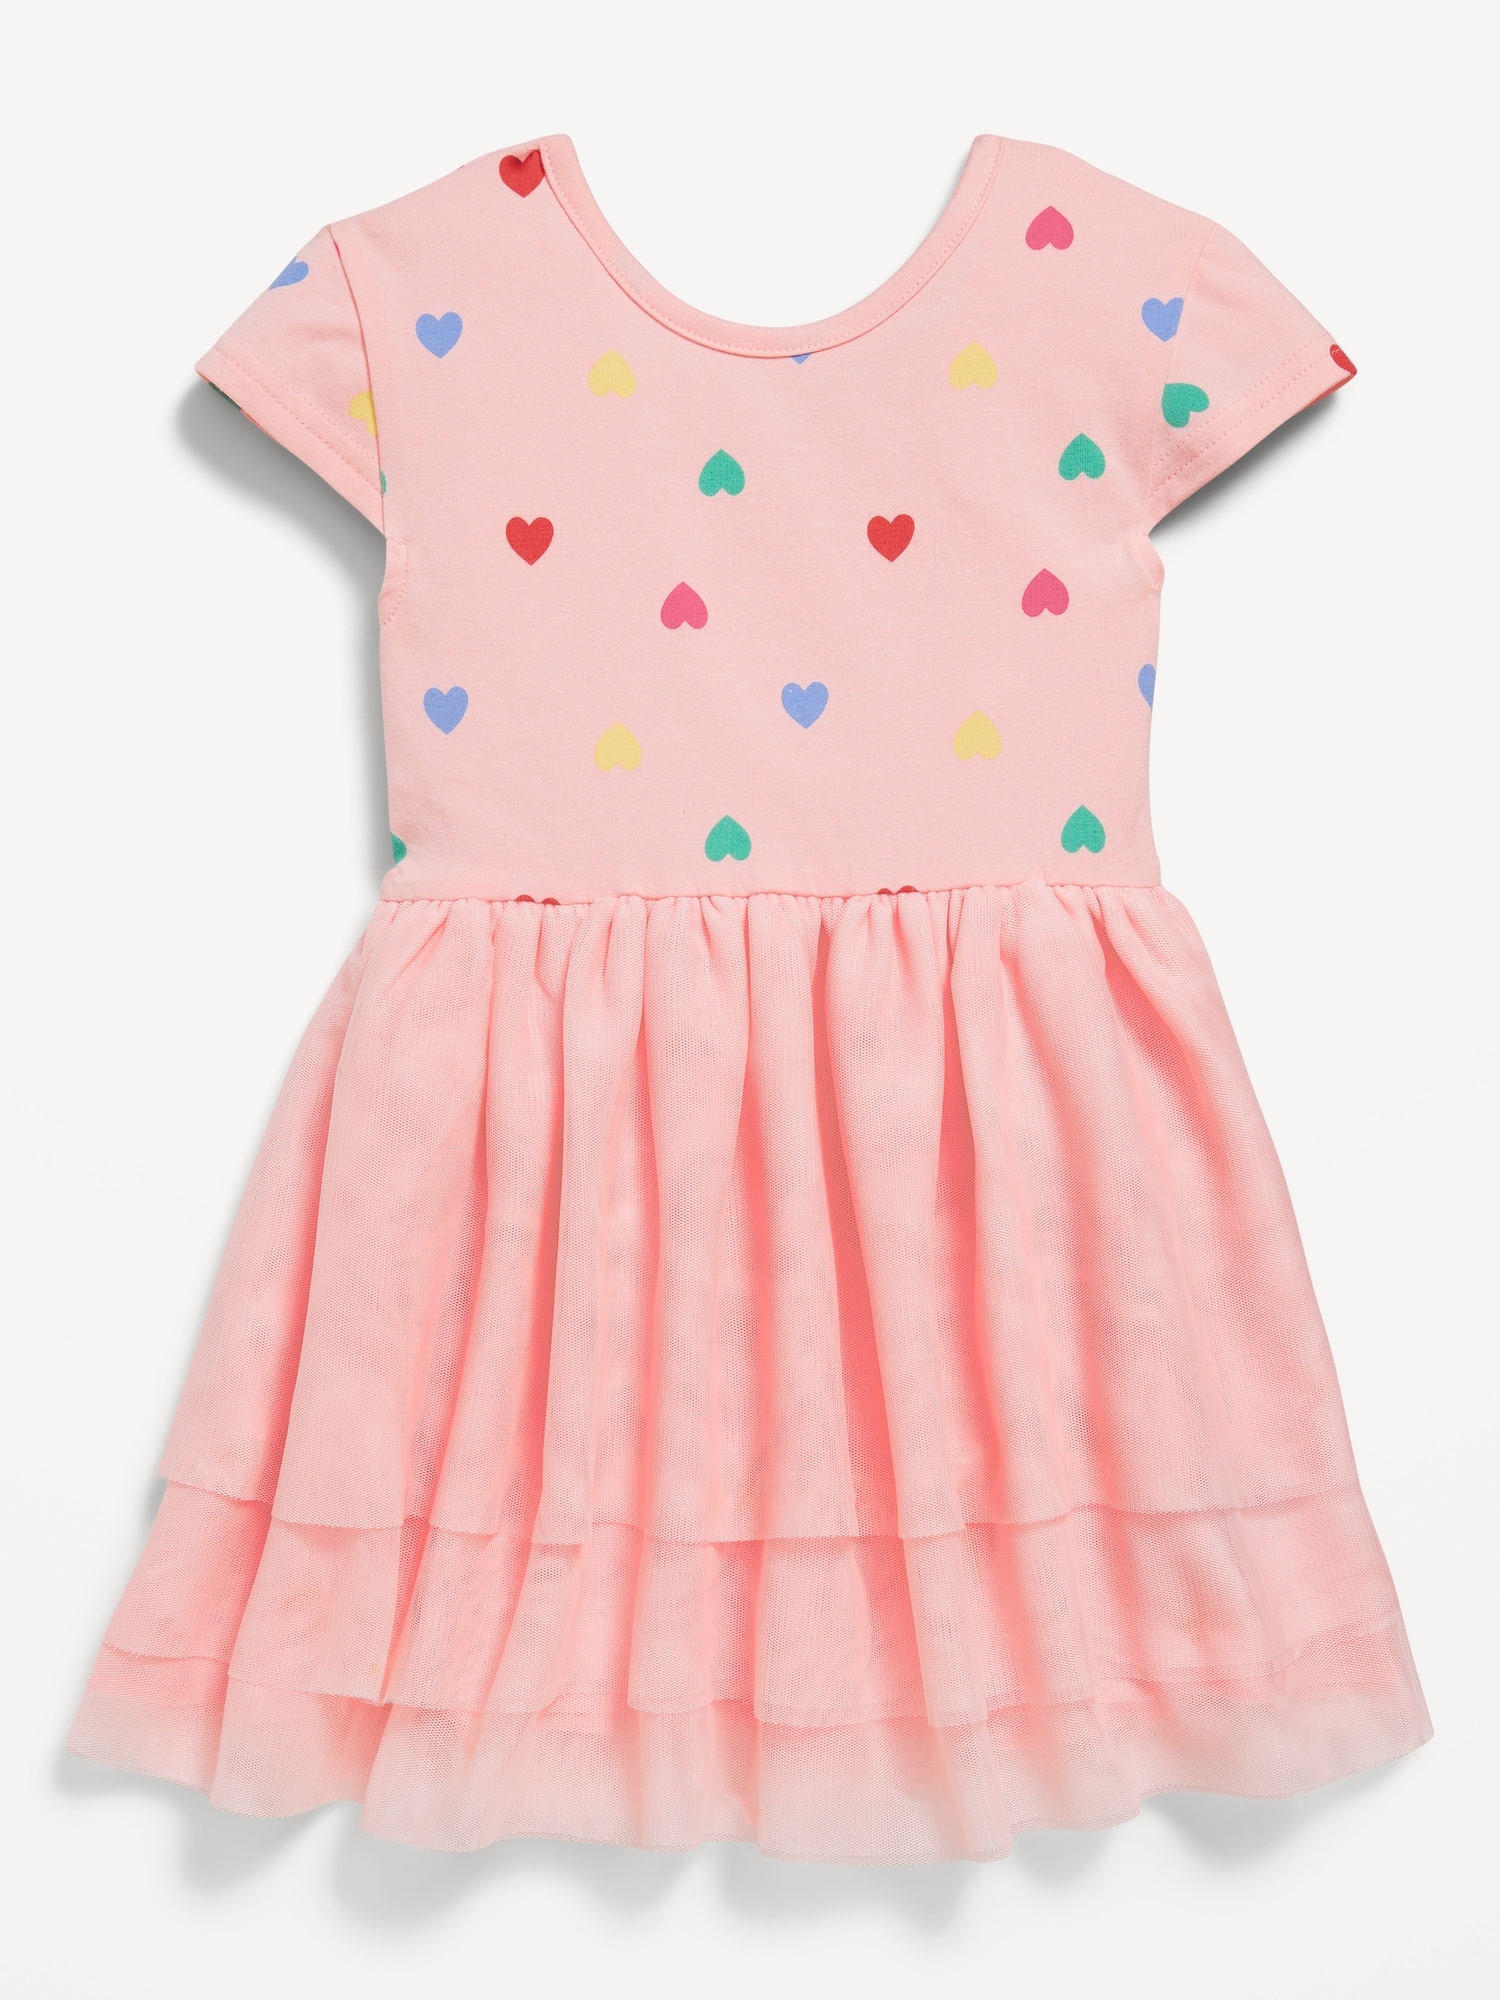 Short-Sleeve Fit and Flare Graphic Tutu Dress for Toddler Girls